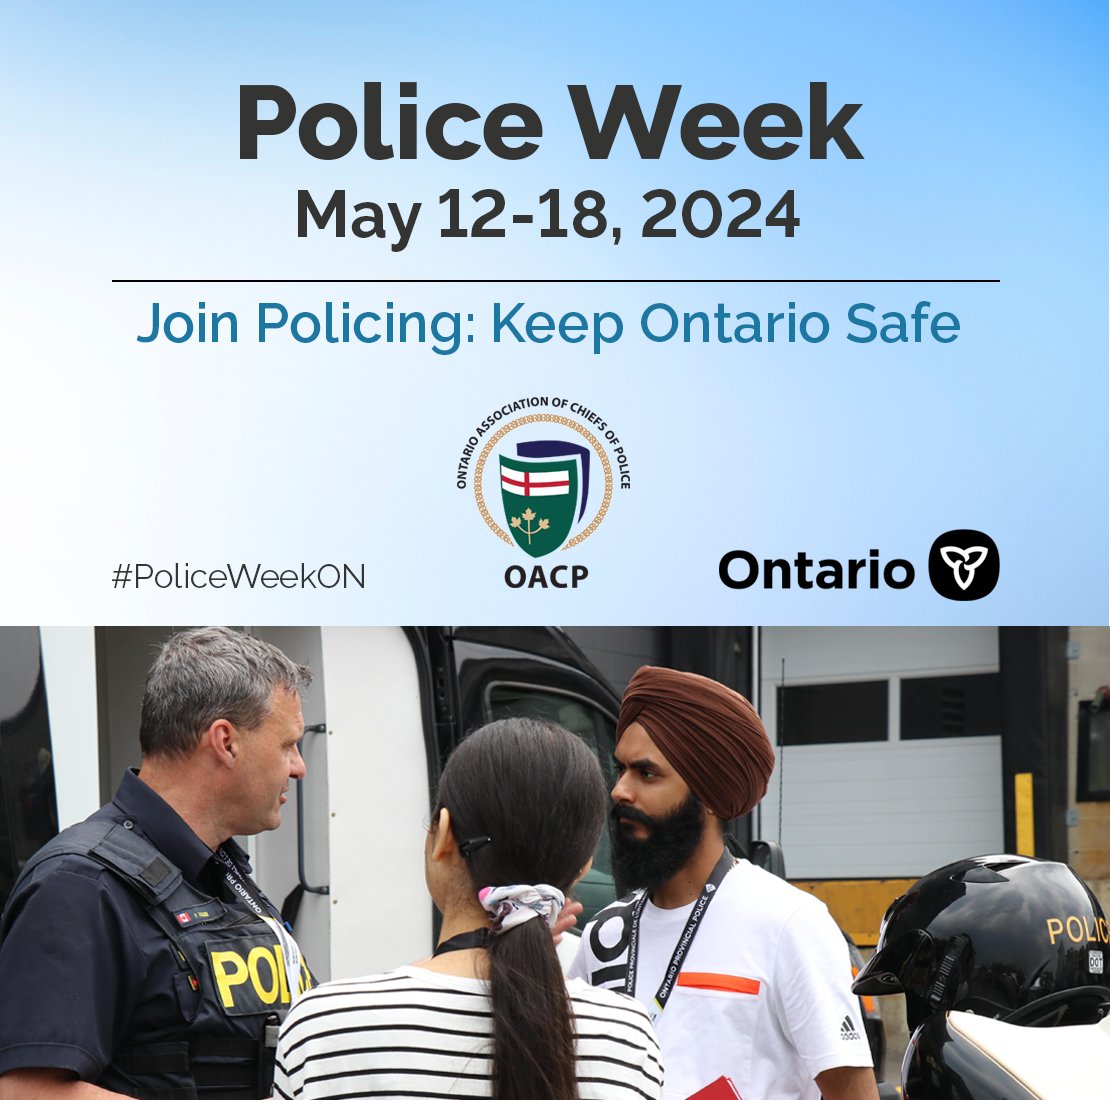 This Police Week, we honour the dedication and bravery of our law enforcement officers who serve and protect the communities of Hastings-Lennox & Addington every day.